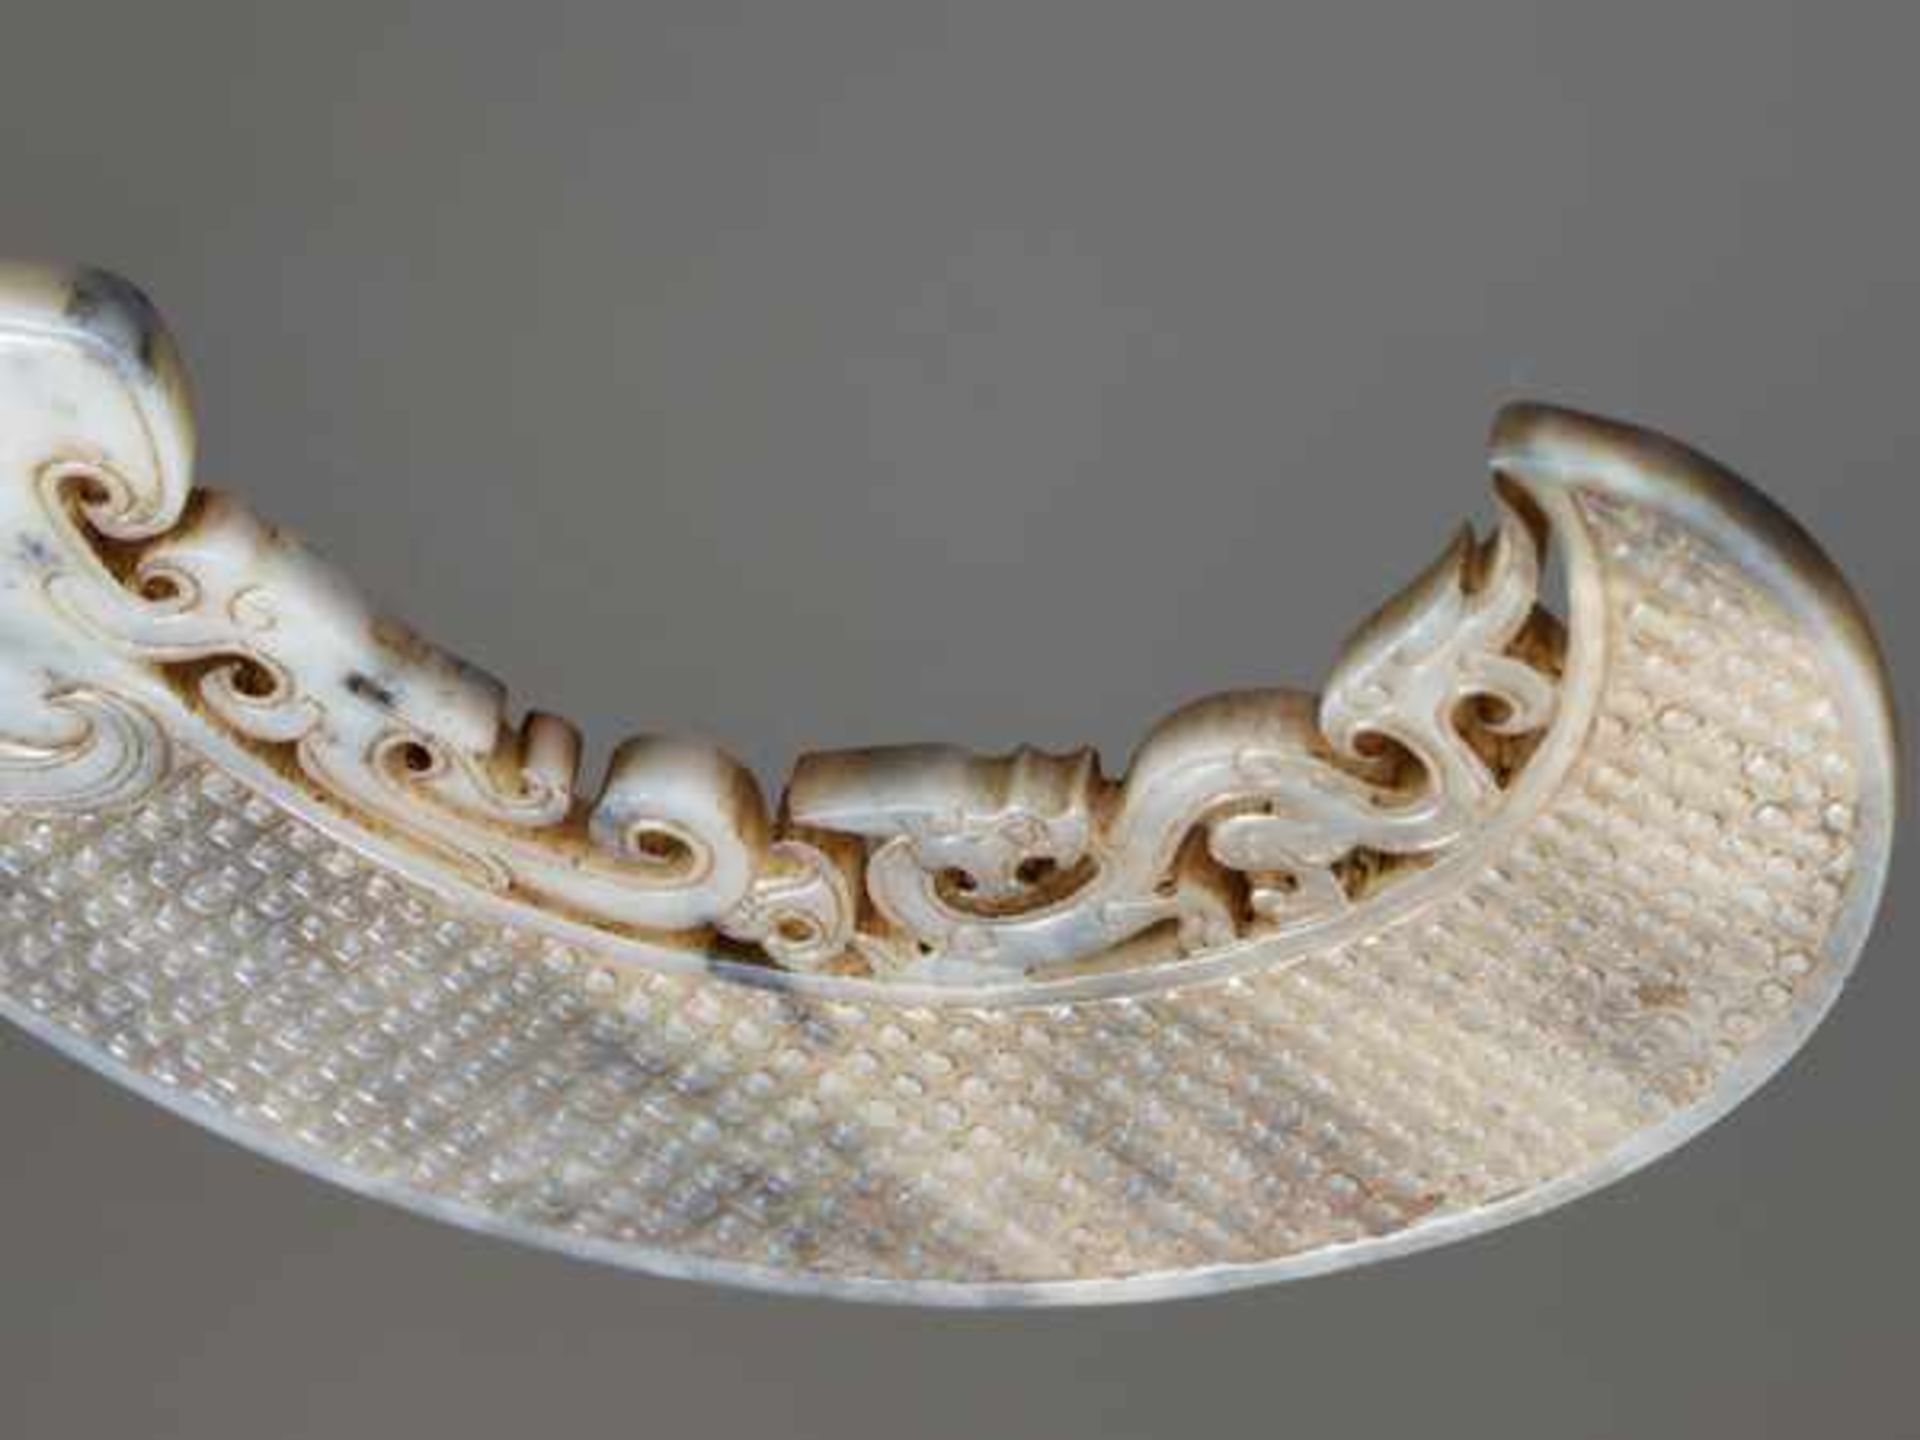 AN EXQUISITE ARCHED DRAGON WITH ORNATE OPENWORK Jade, China. Early Western Han Dynasty, 2nd - Image 3 of 6